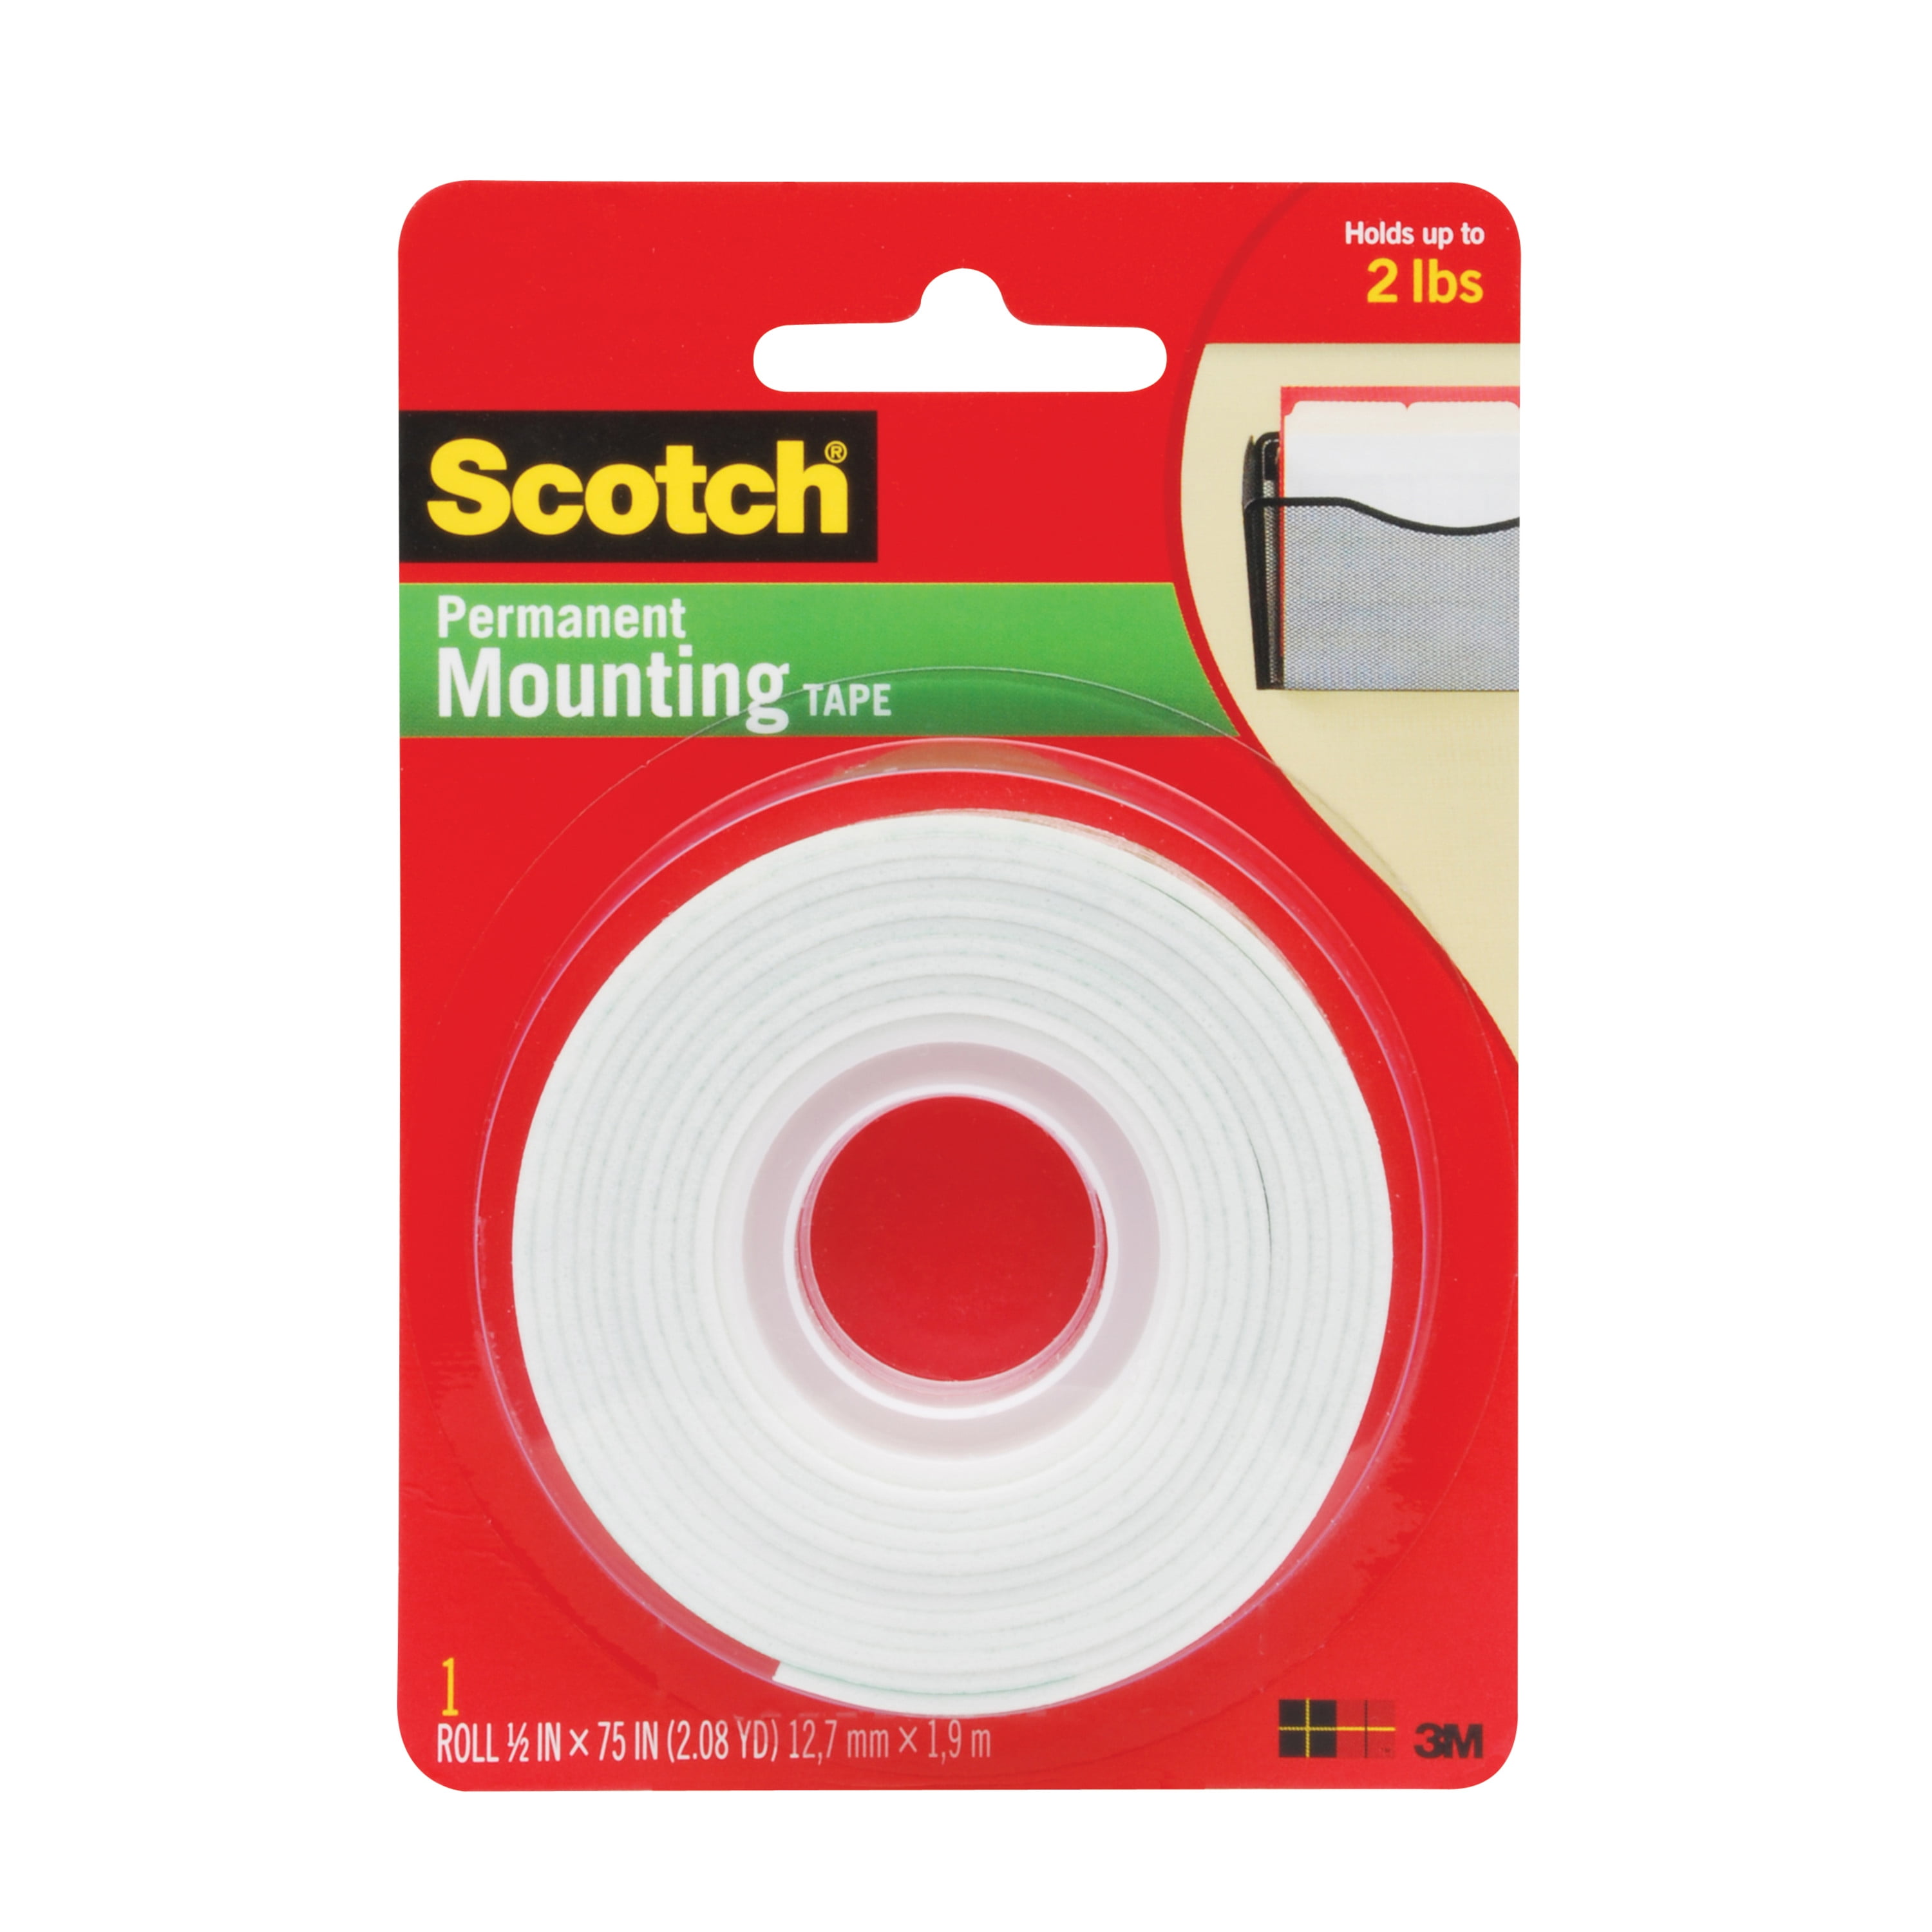 1x1 inch Holds up to 6 pounds 48 squares Scotch Indoor Mounting Tape 